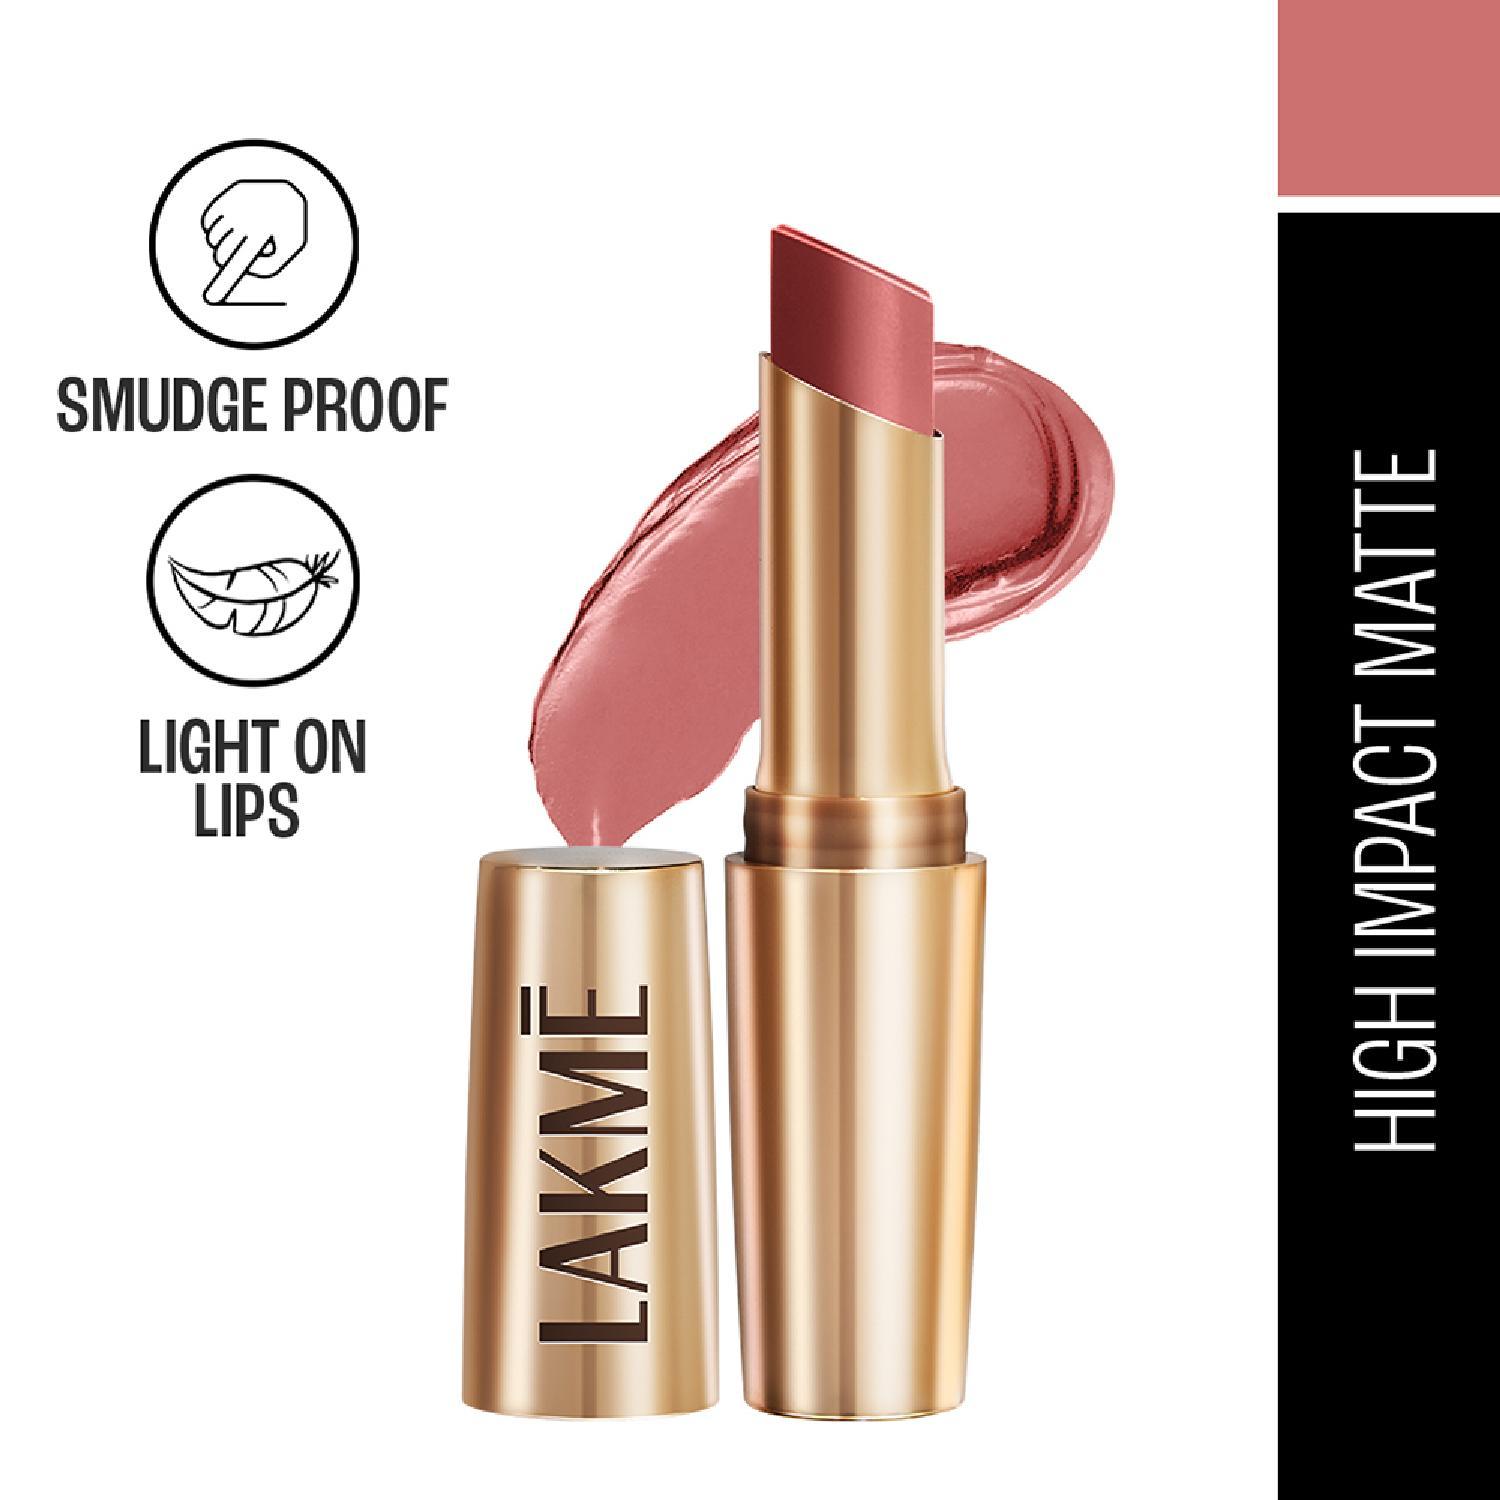 Lakme 9 to 5 Powerplay Priming Matte Lipstick, Lasts 16hrs, Blushing Nude (3.6g)